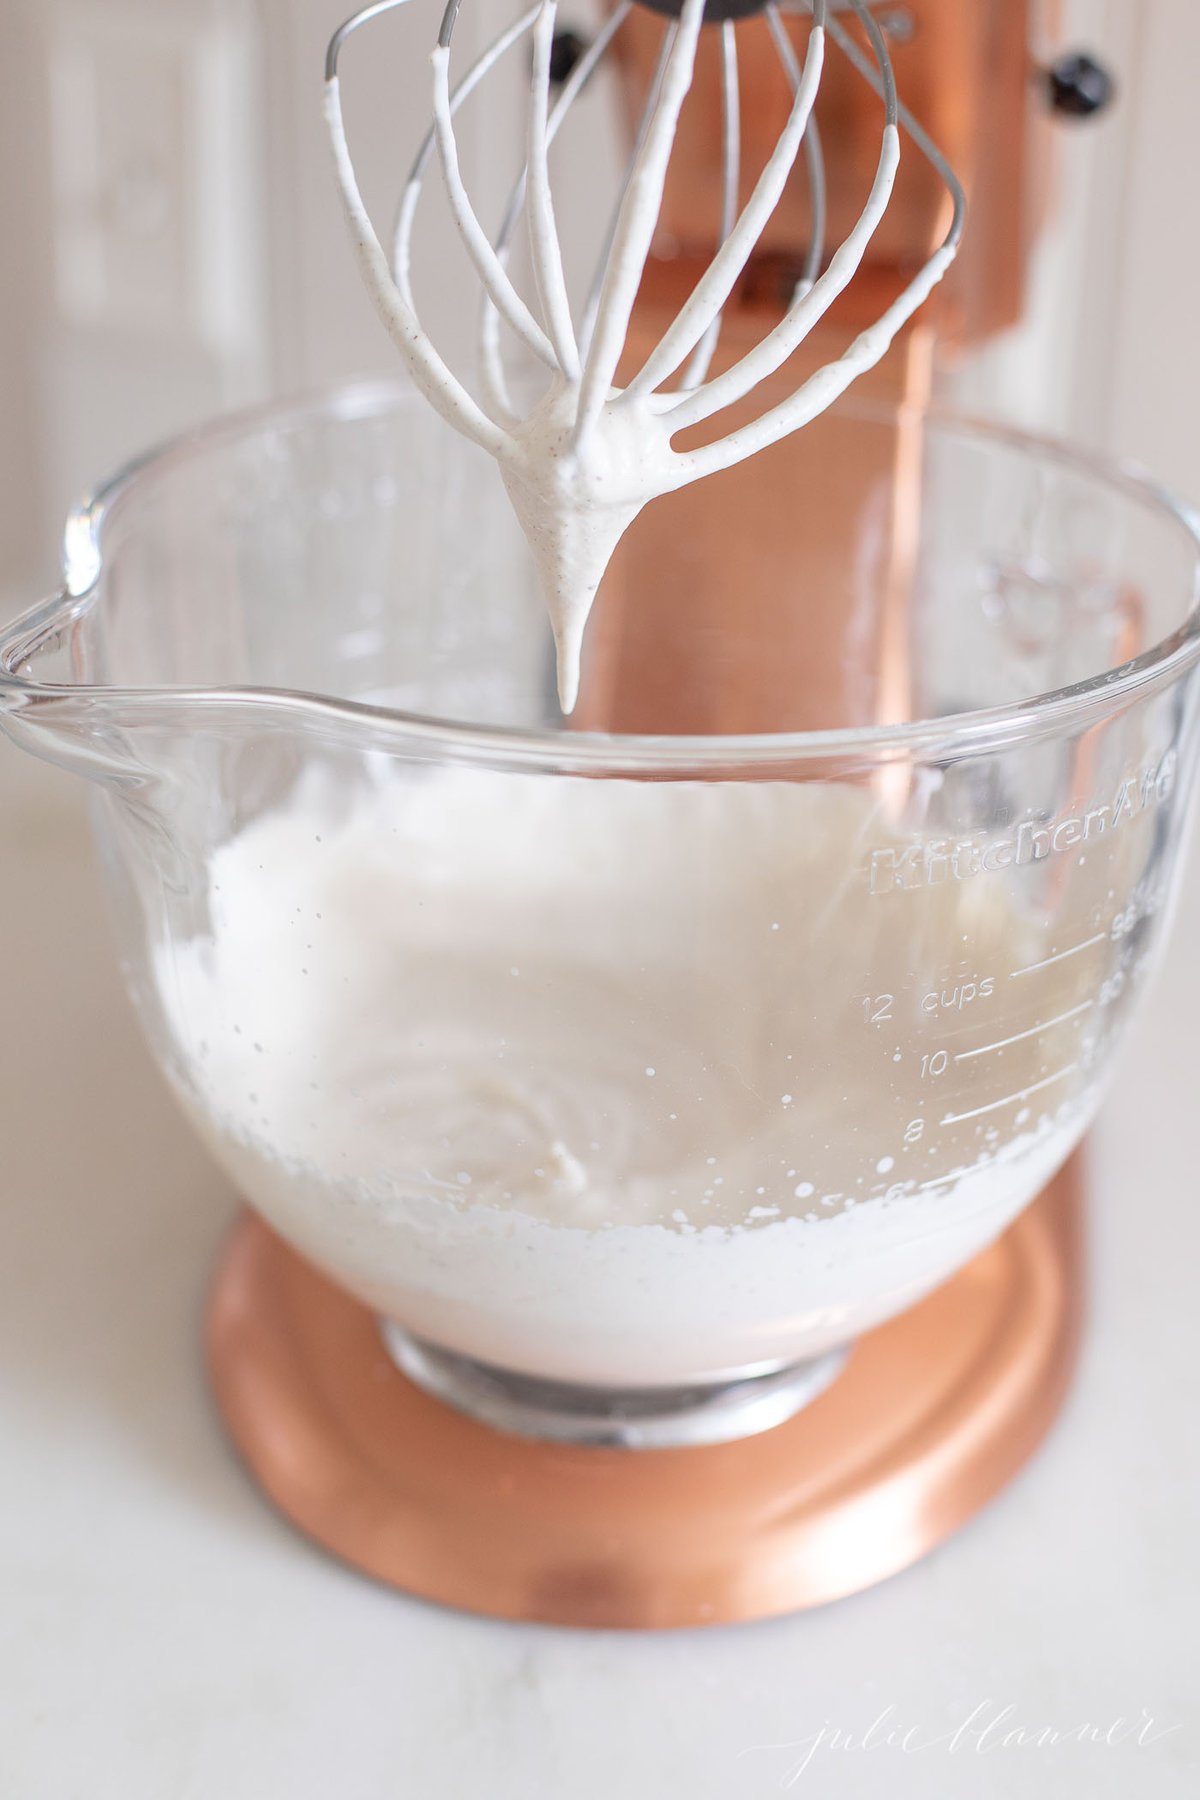 A clear glass mixing bowl of a stand mixer filled with whipped cream.